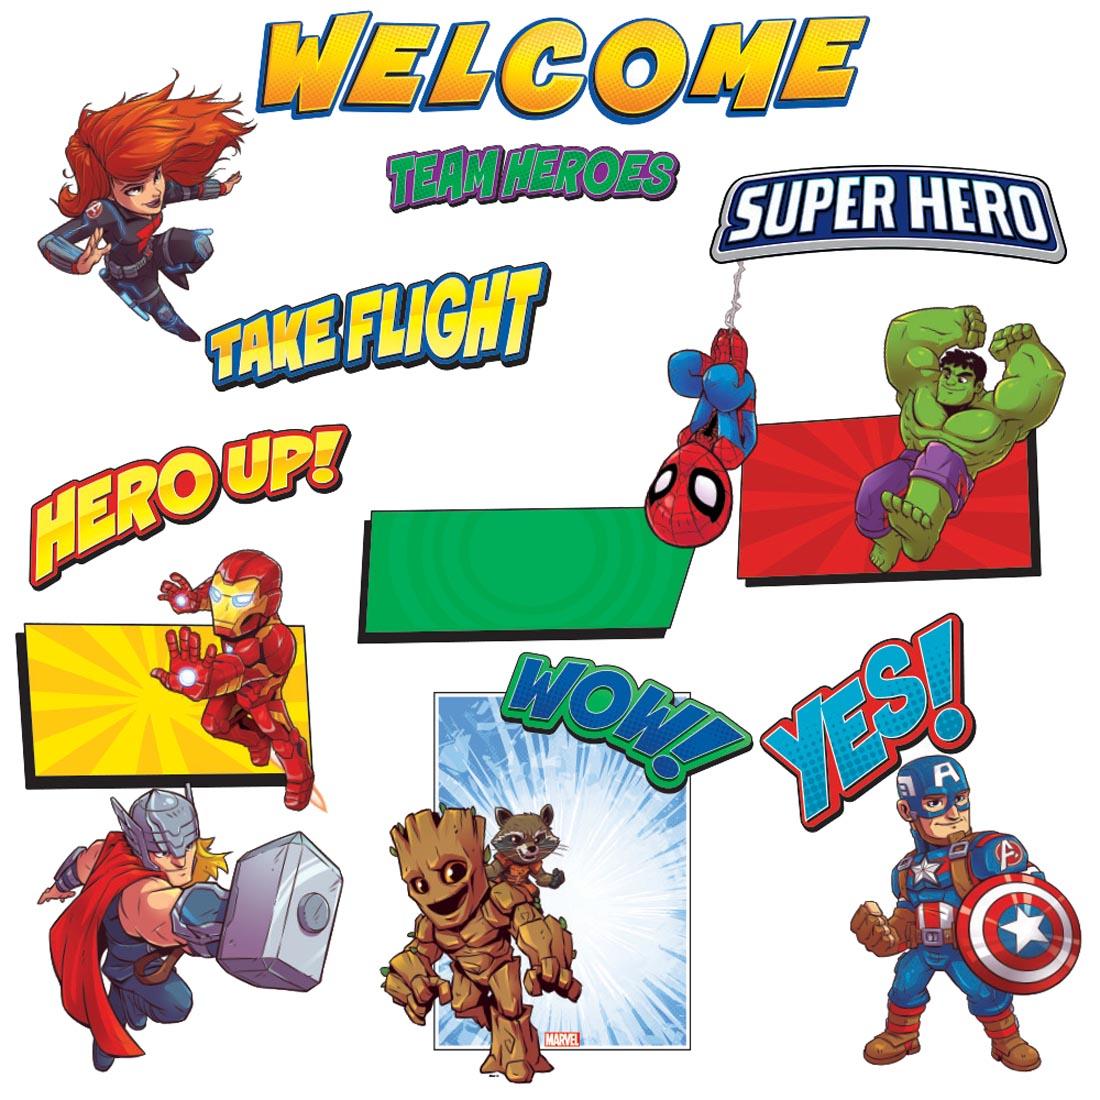 Marvel Super Hero Adventure Welcome Bulletin Board Set with the words Team Heroes, Take Flight and Hero Up!